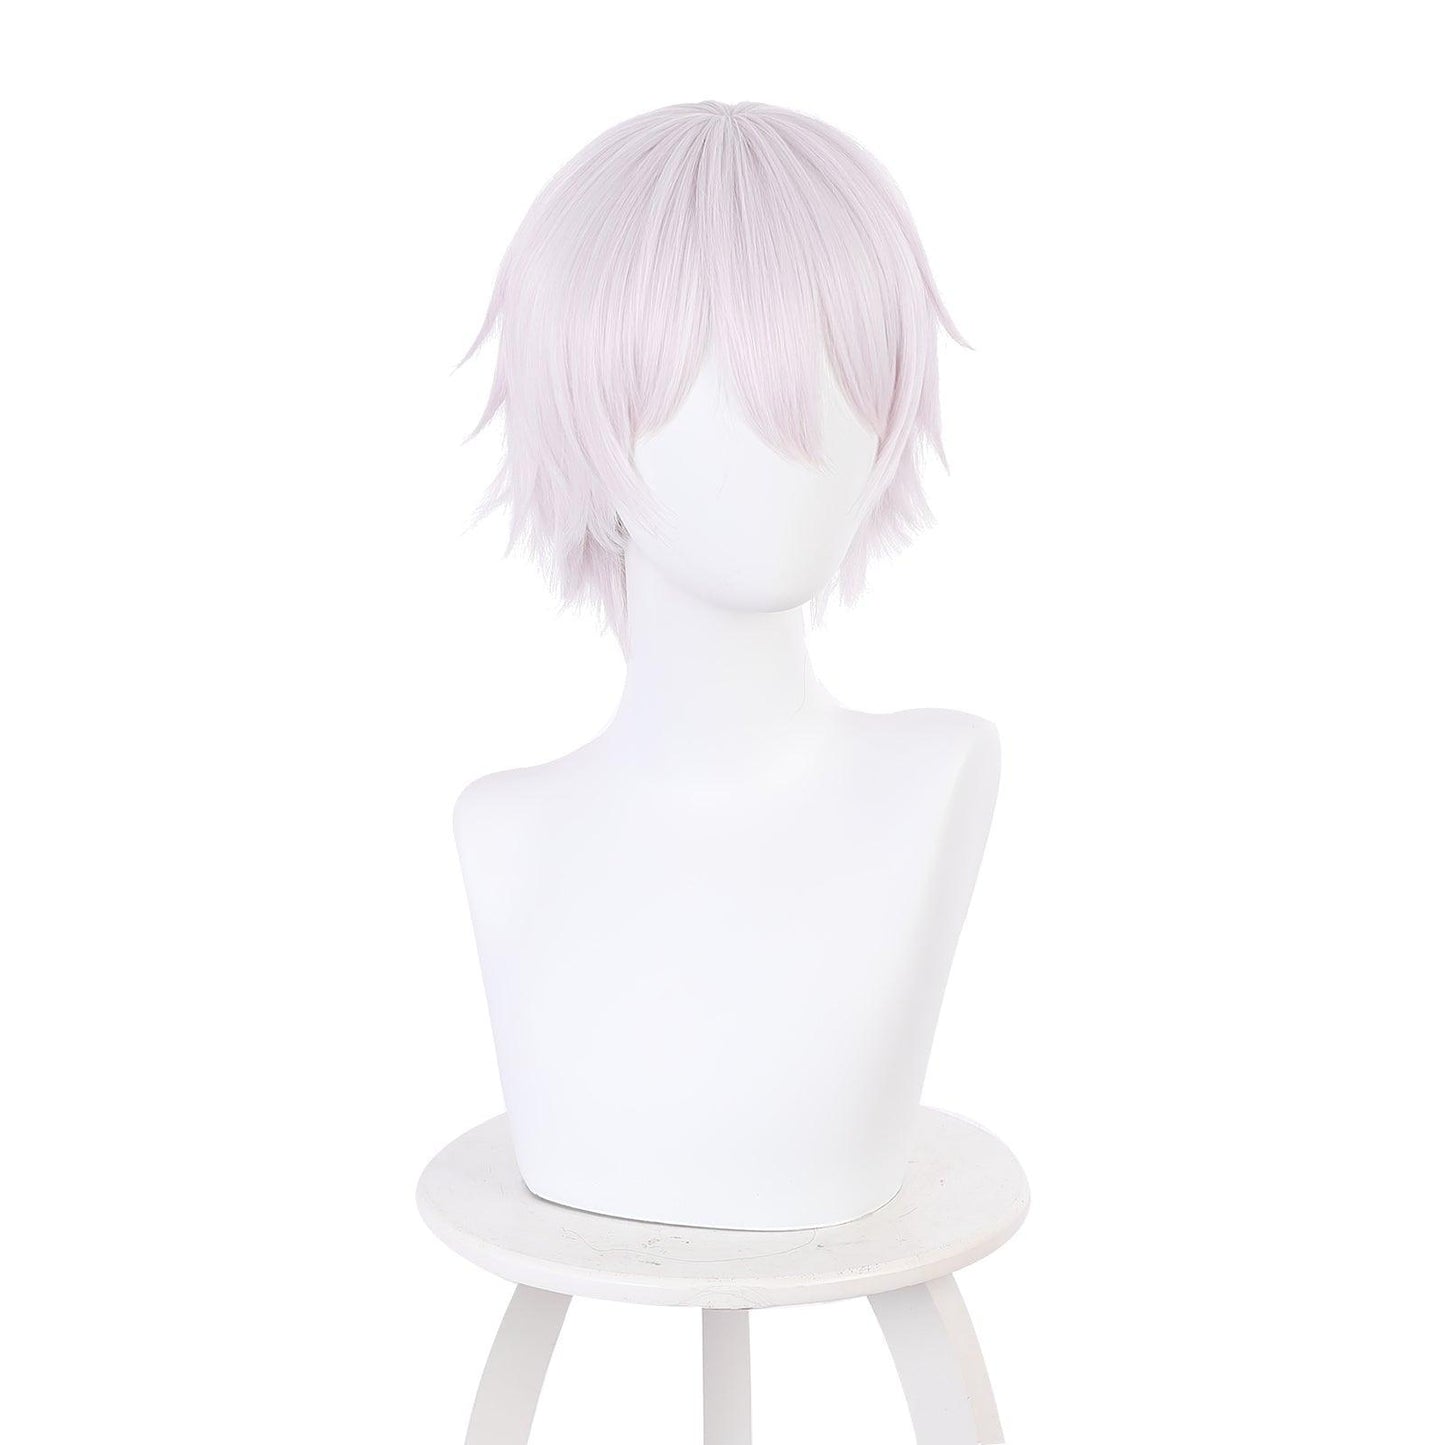 anime cosplay wigs for jeanne pink cosplay wig of the case study of vanitas 523c